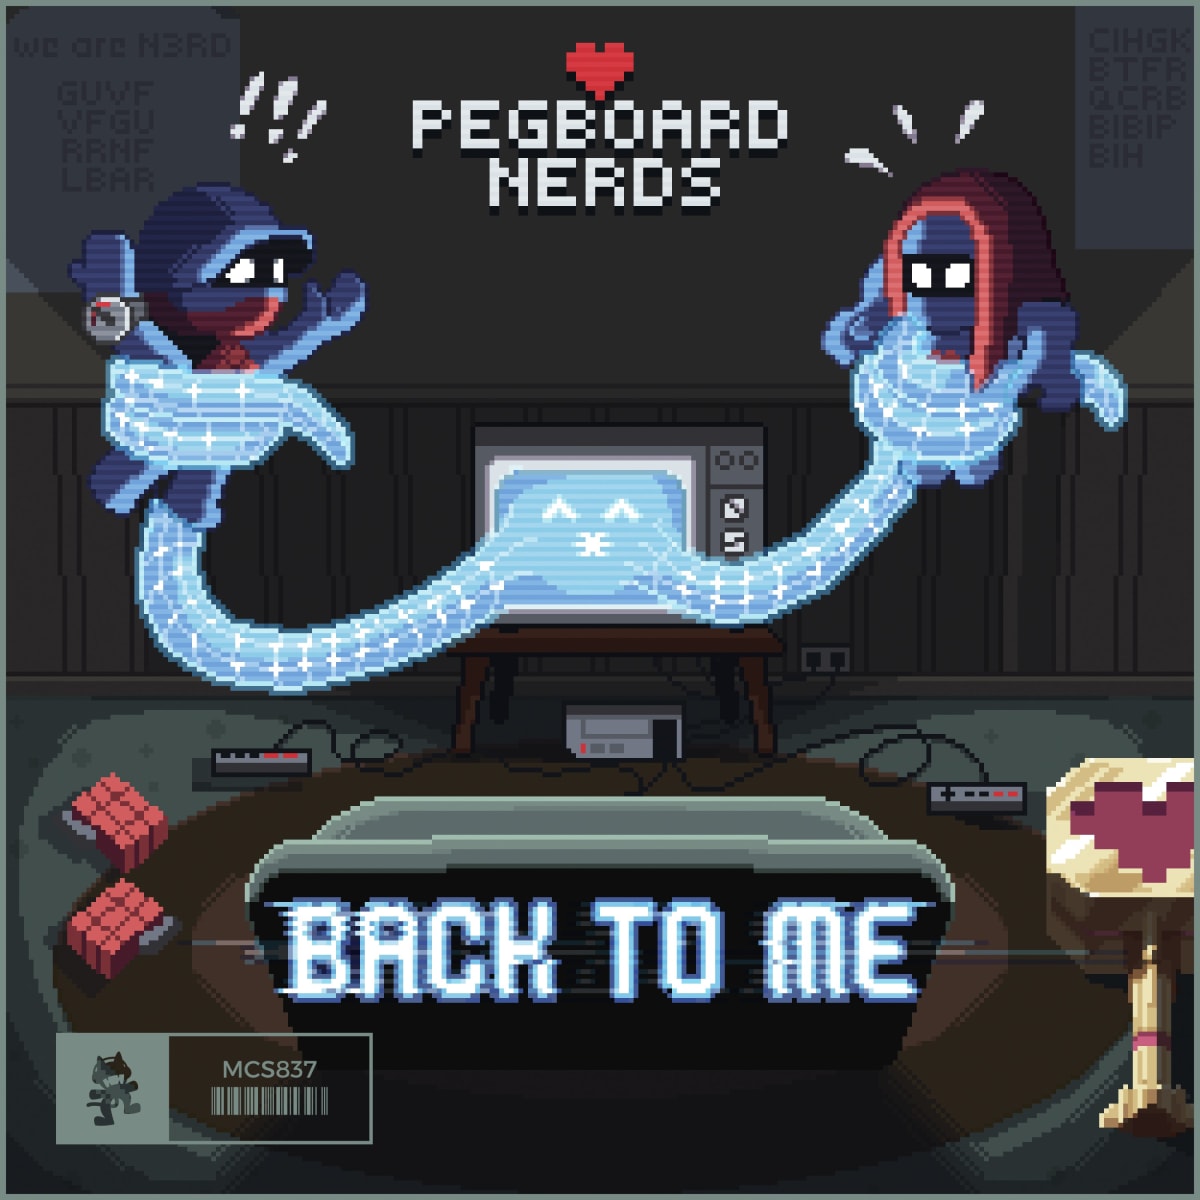 Pegboard Nerds Follow Up with "Back To Me" on Monstercat - EDM.com - The Latest Electronic Music News, & Artists